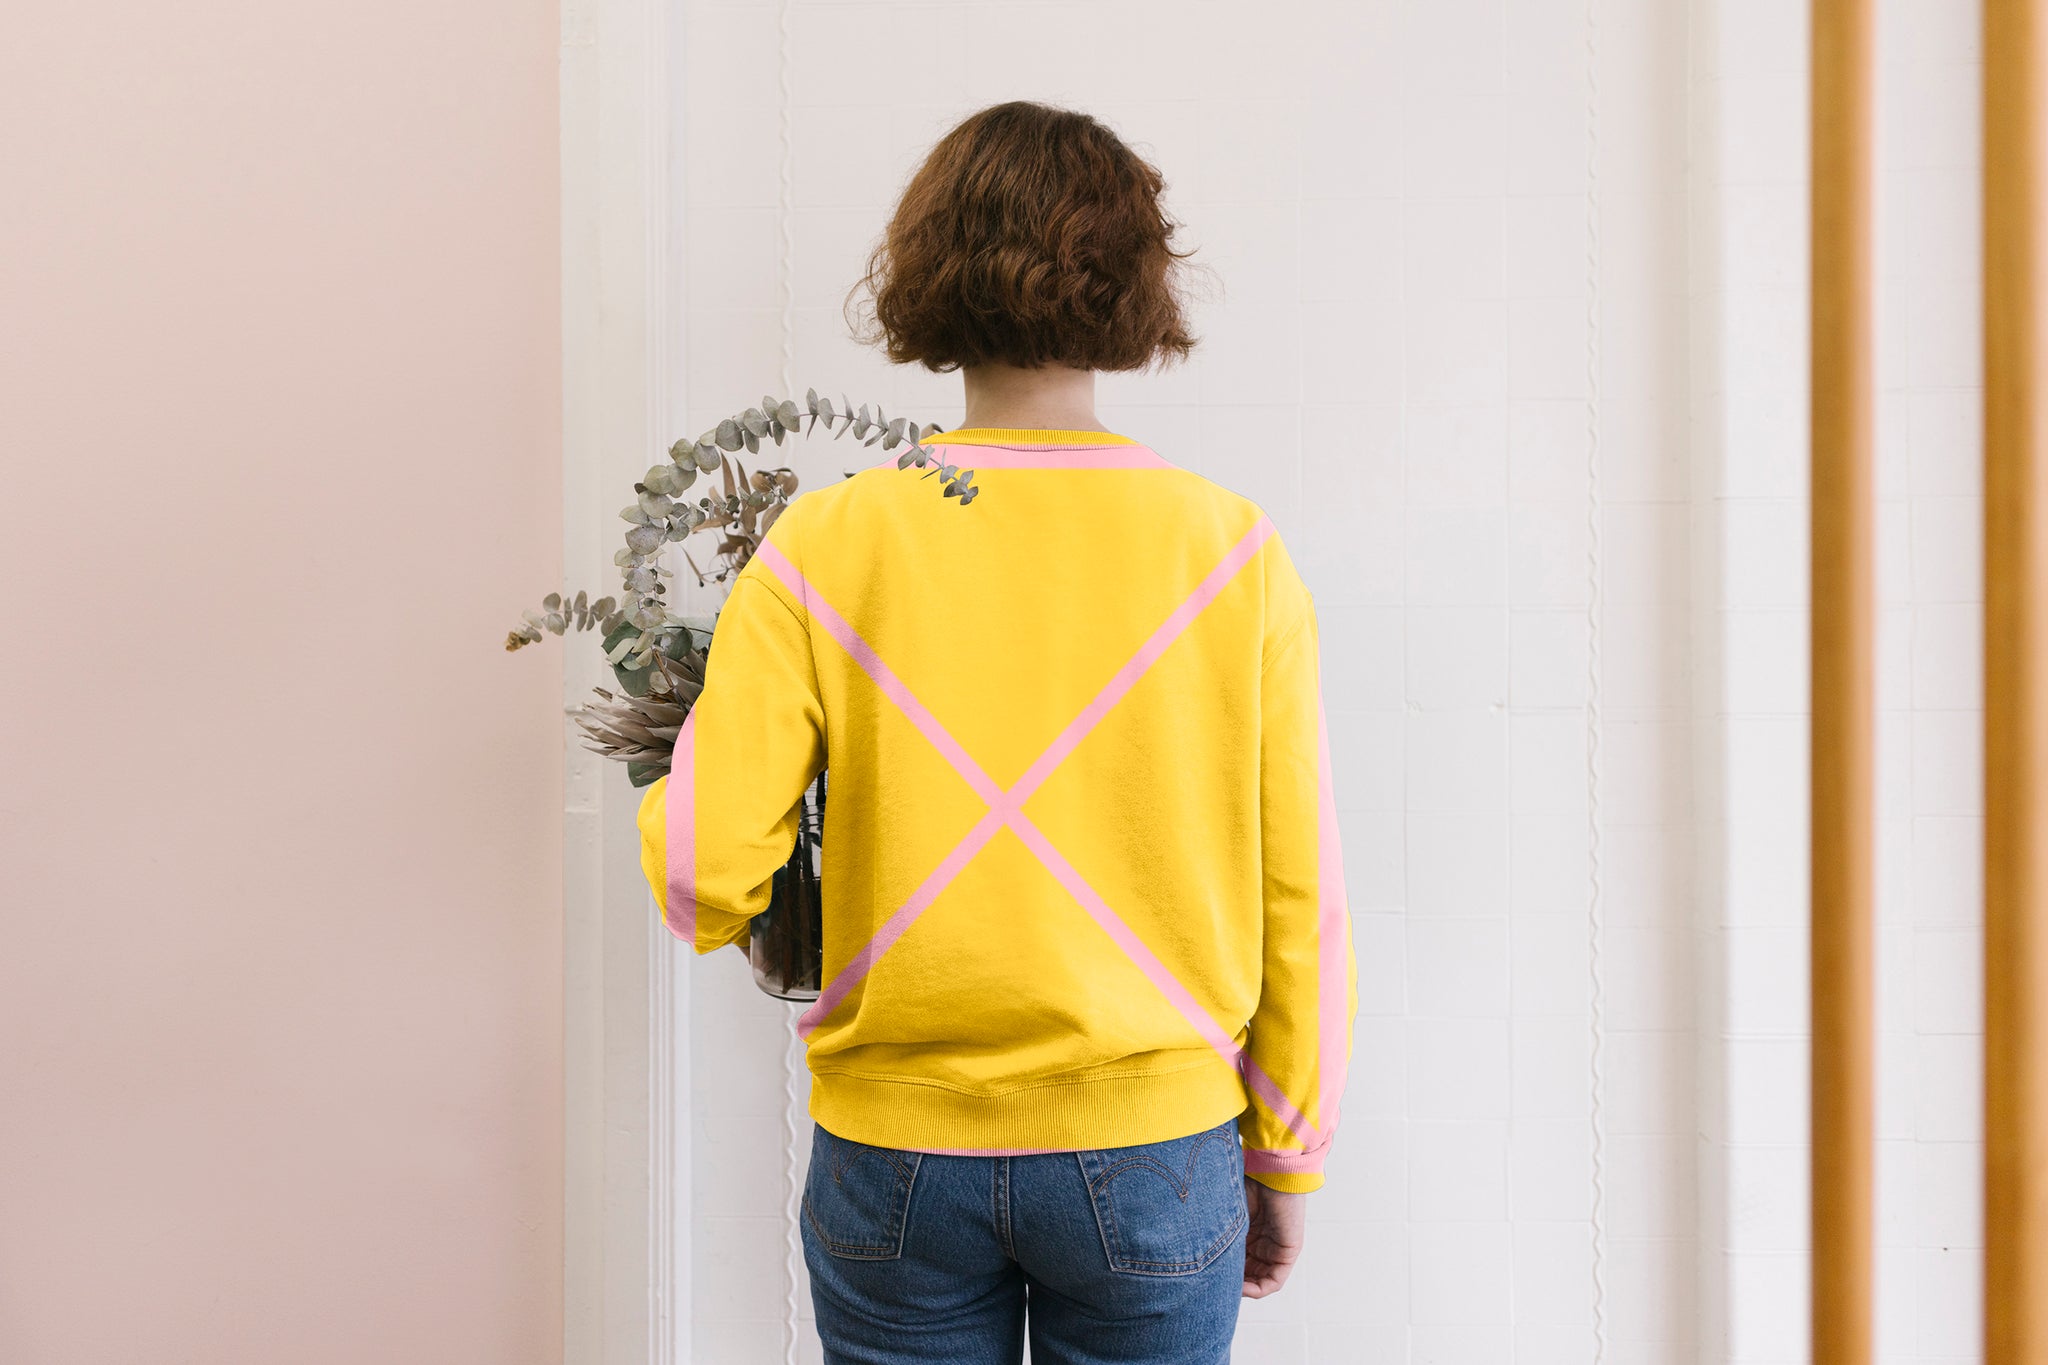 A lady is standing in front of a wall holding a eucalyptus plant. She is wearing a yellow sweatshirt with a large pink X grid line on her back. Her hair is brown and sits at the height of her ears. The background is a soft pink.